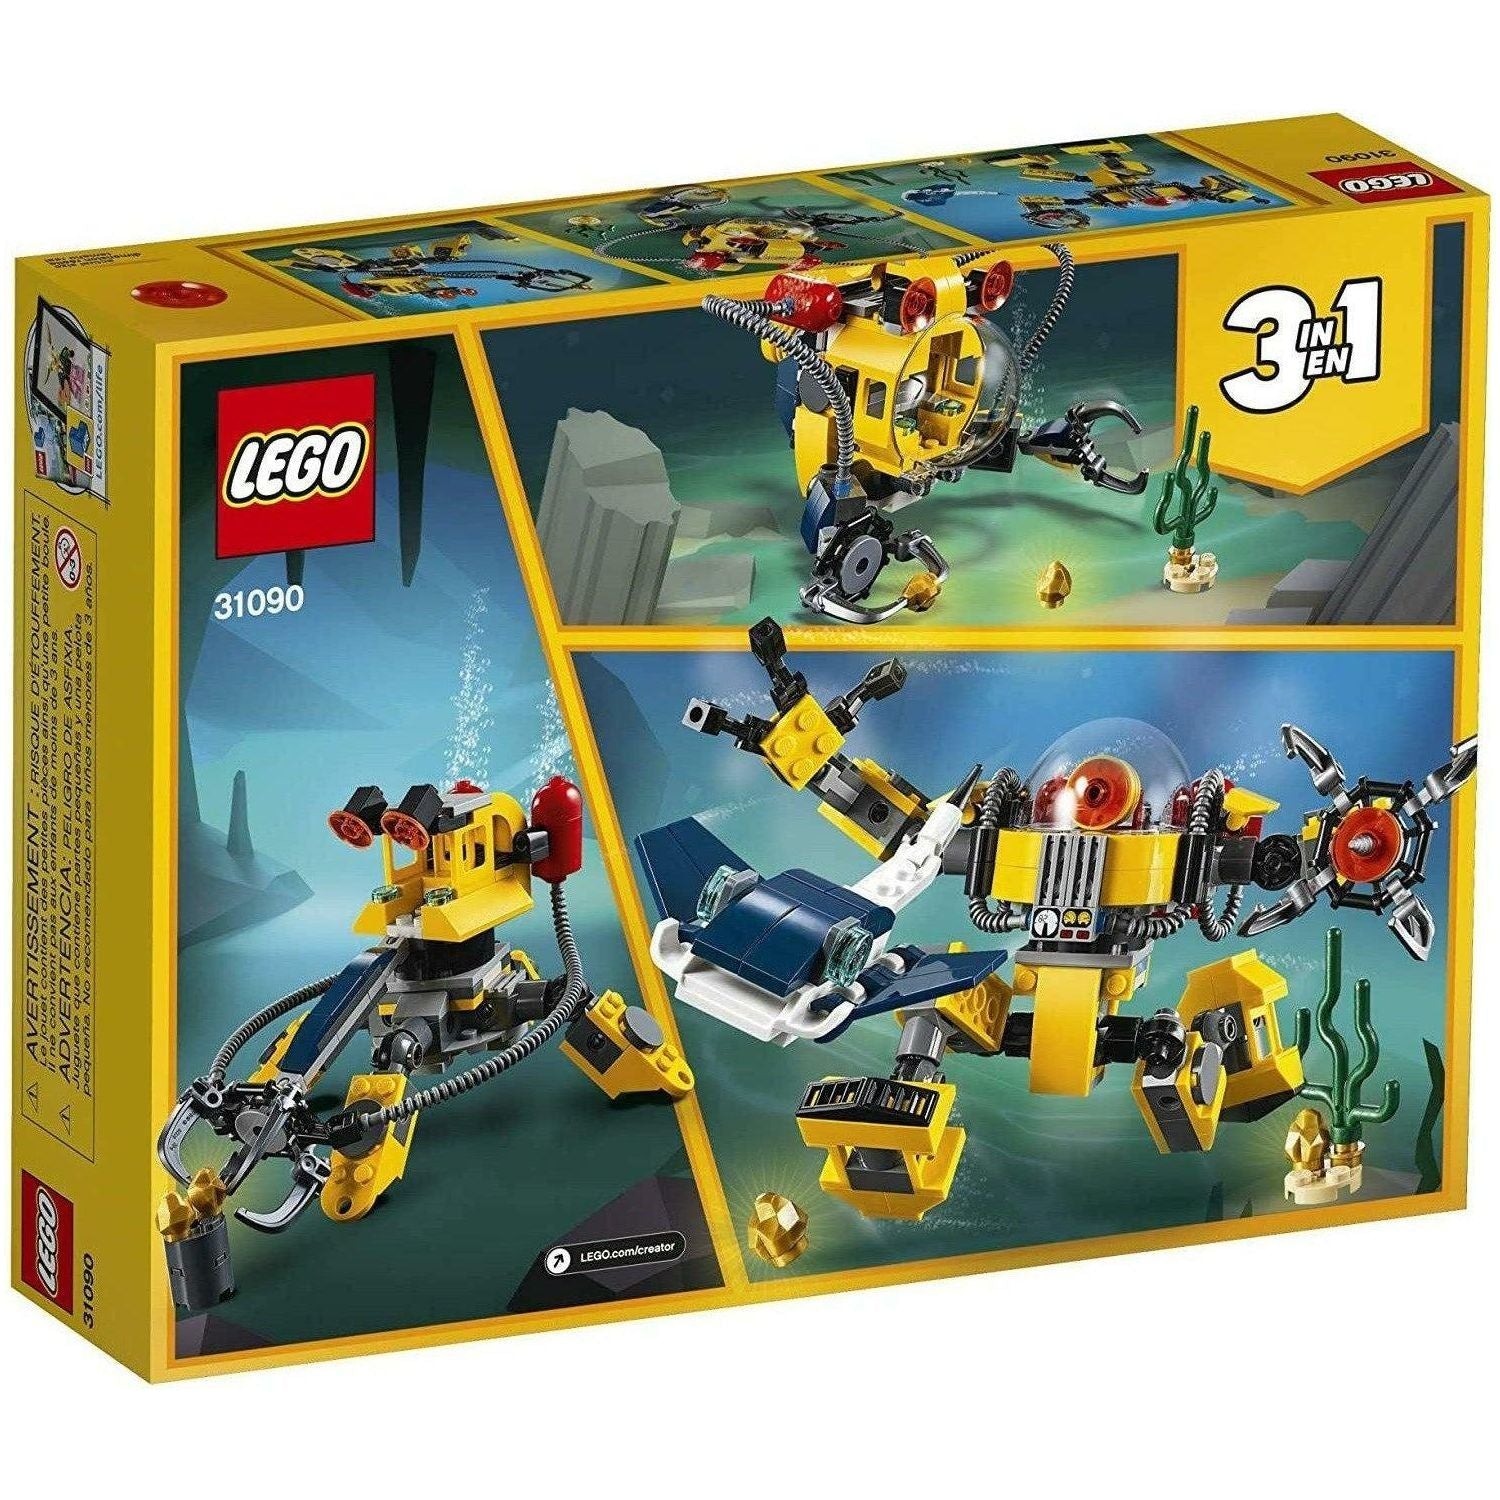 LEGO 31090 Creator 3in1 Underwater Robot Building Kit (207 Pieces) - BumbleToys - 5-7 Years, Boys, Creator 3in1, LEGO, OXE